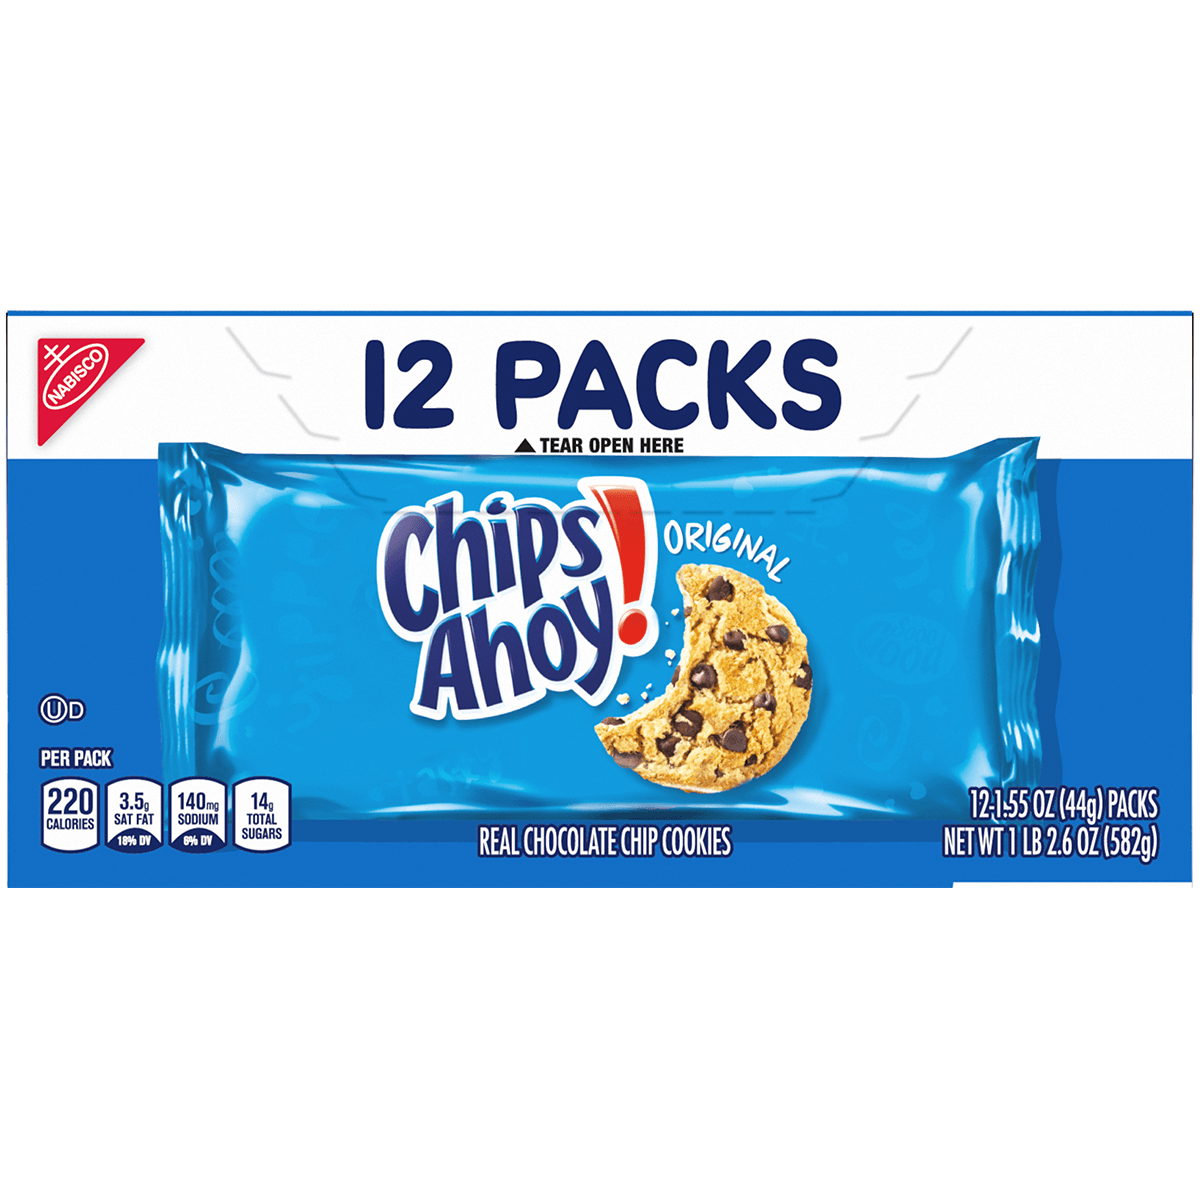 Chips Ahoy! Chocolate Chip Cookies, Candy Blasts, Crunchy 12.4 Oz, Chocolate & Chocolate Chip